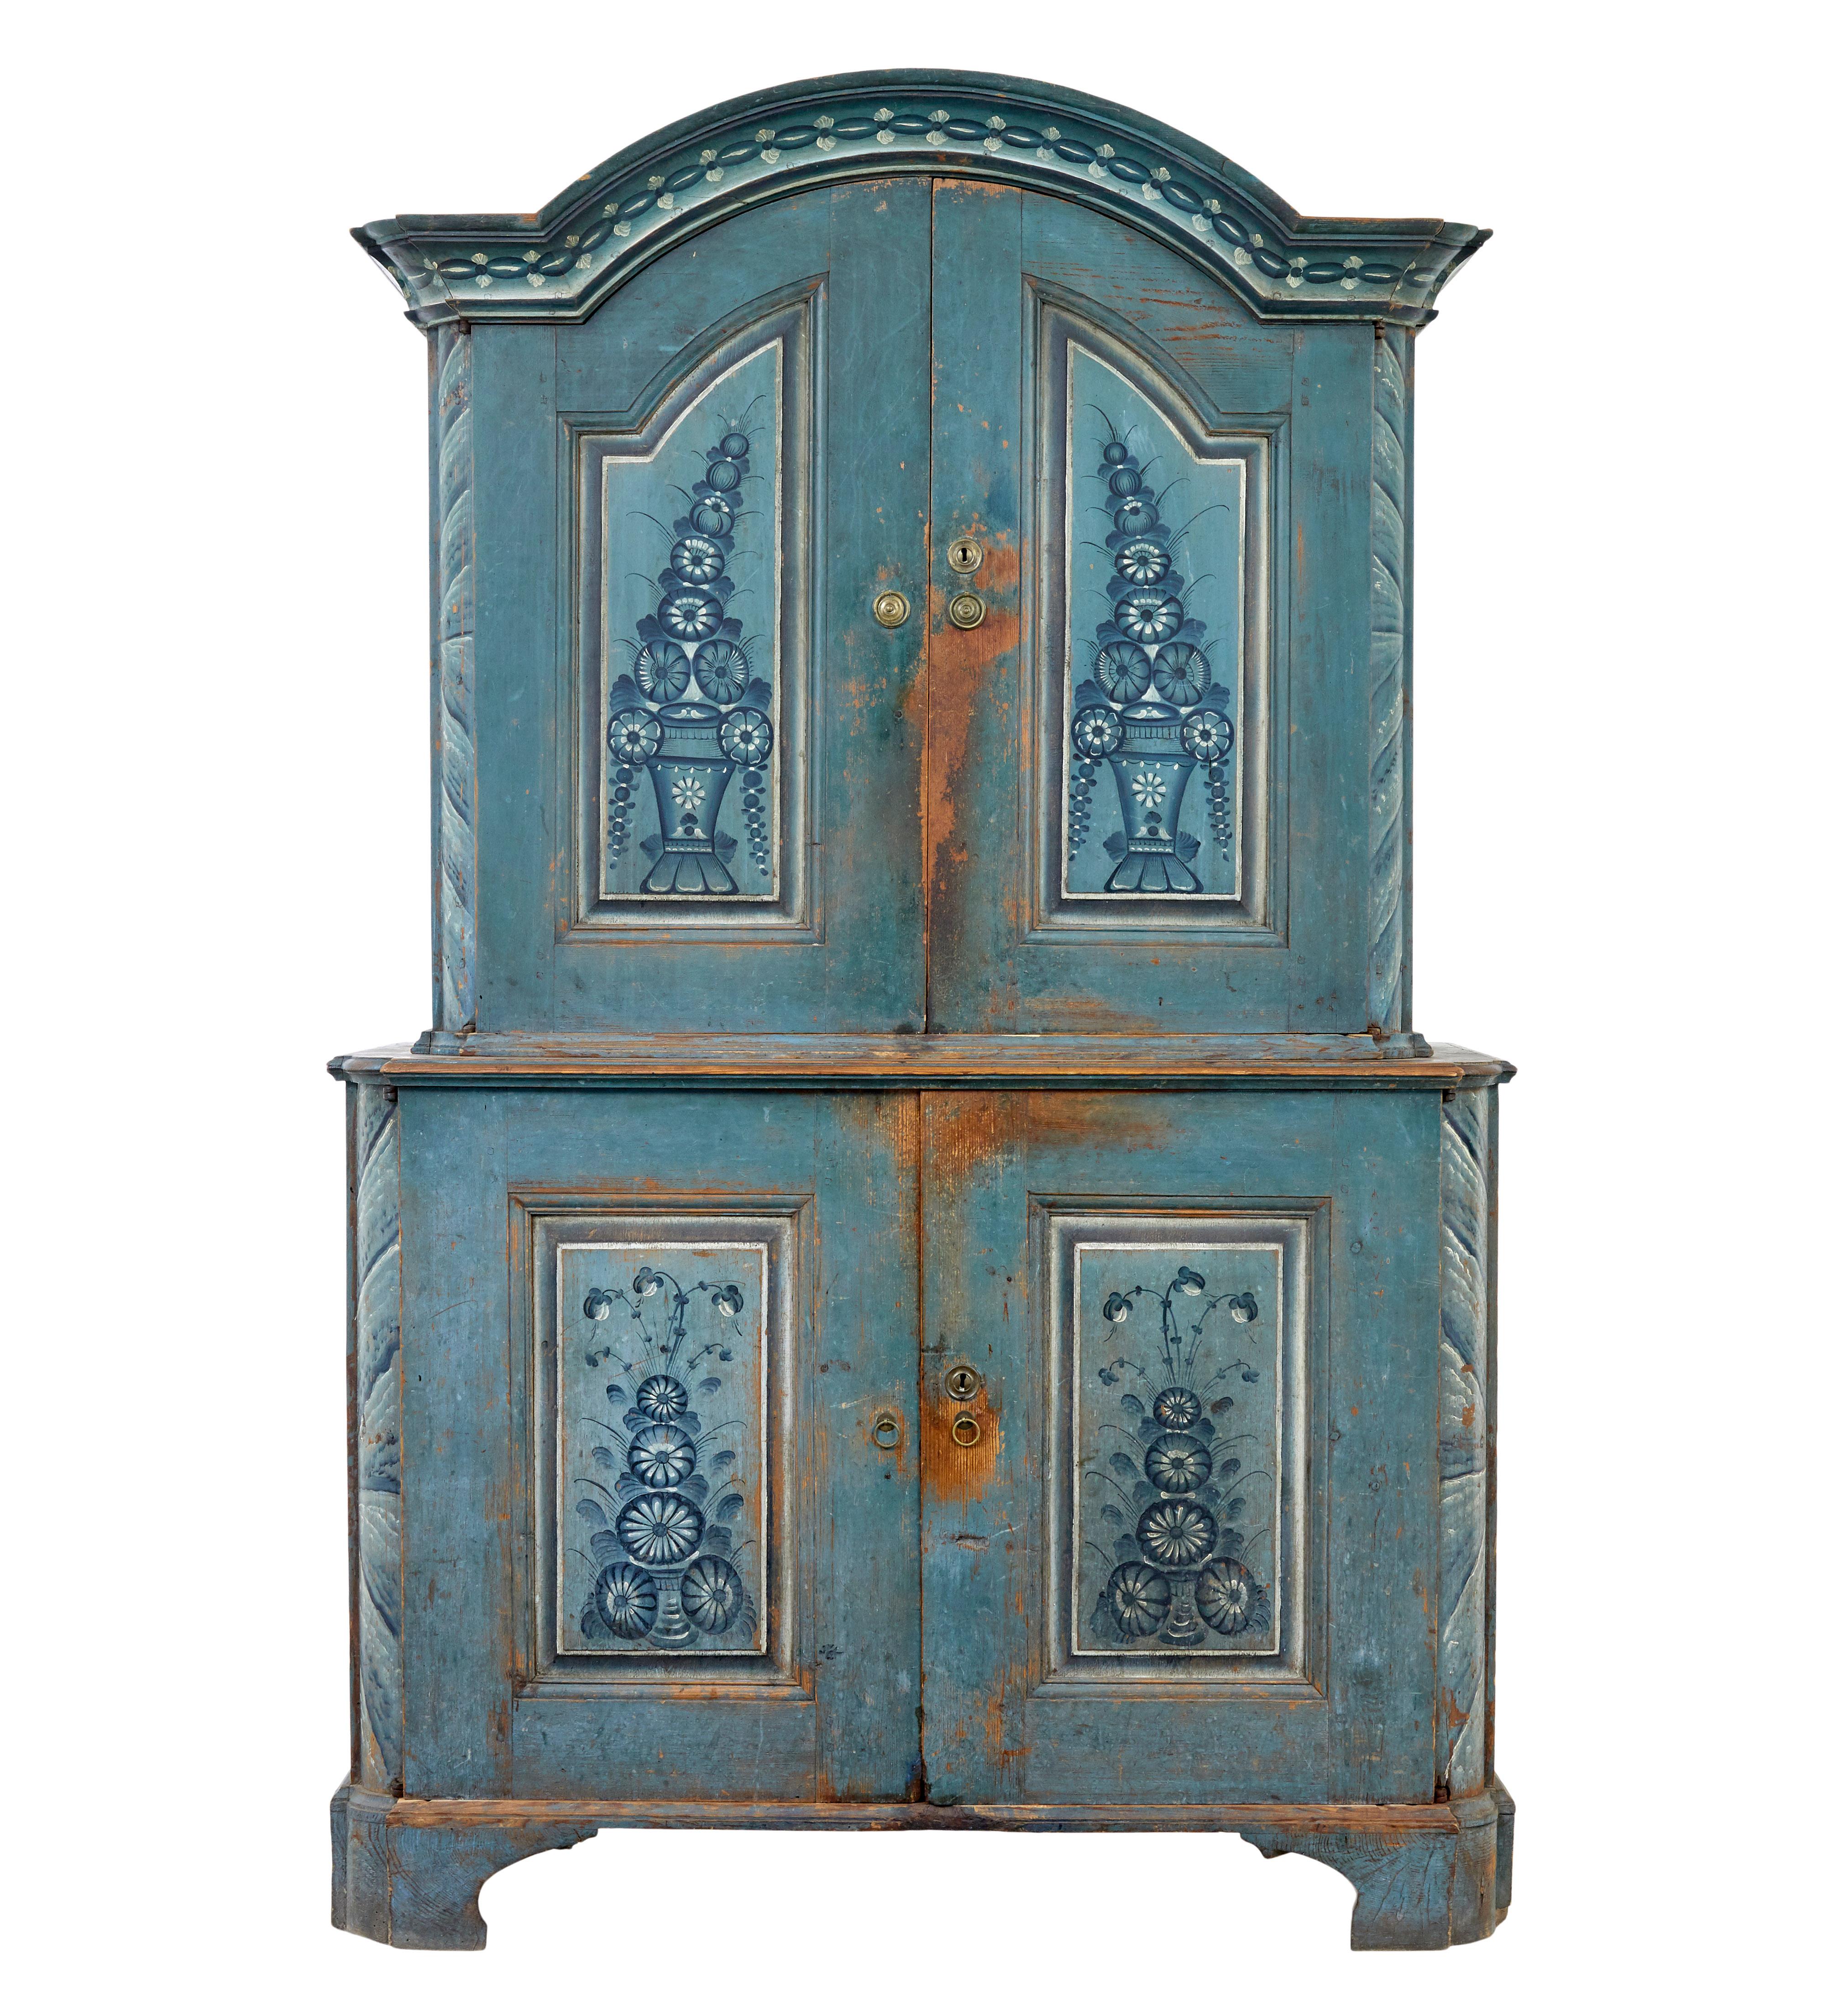 We are pleased to offer this rare piece of traditional furniture circa 1801.

This piece was made and painted in a village called tuna (tuna måleri), close to dalarna and hälsingland.  This type of paint work was only done for a period of around 10